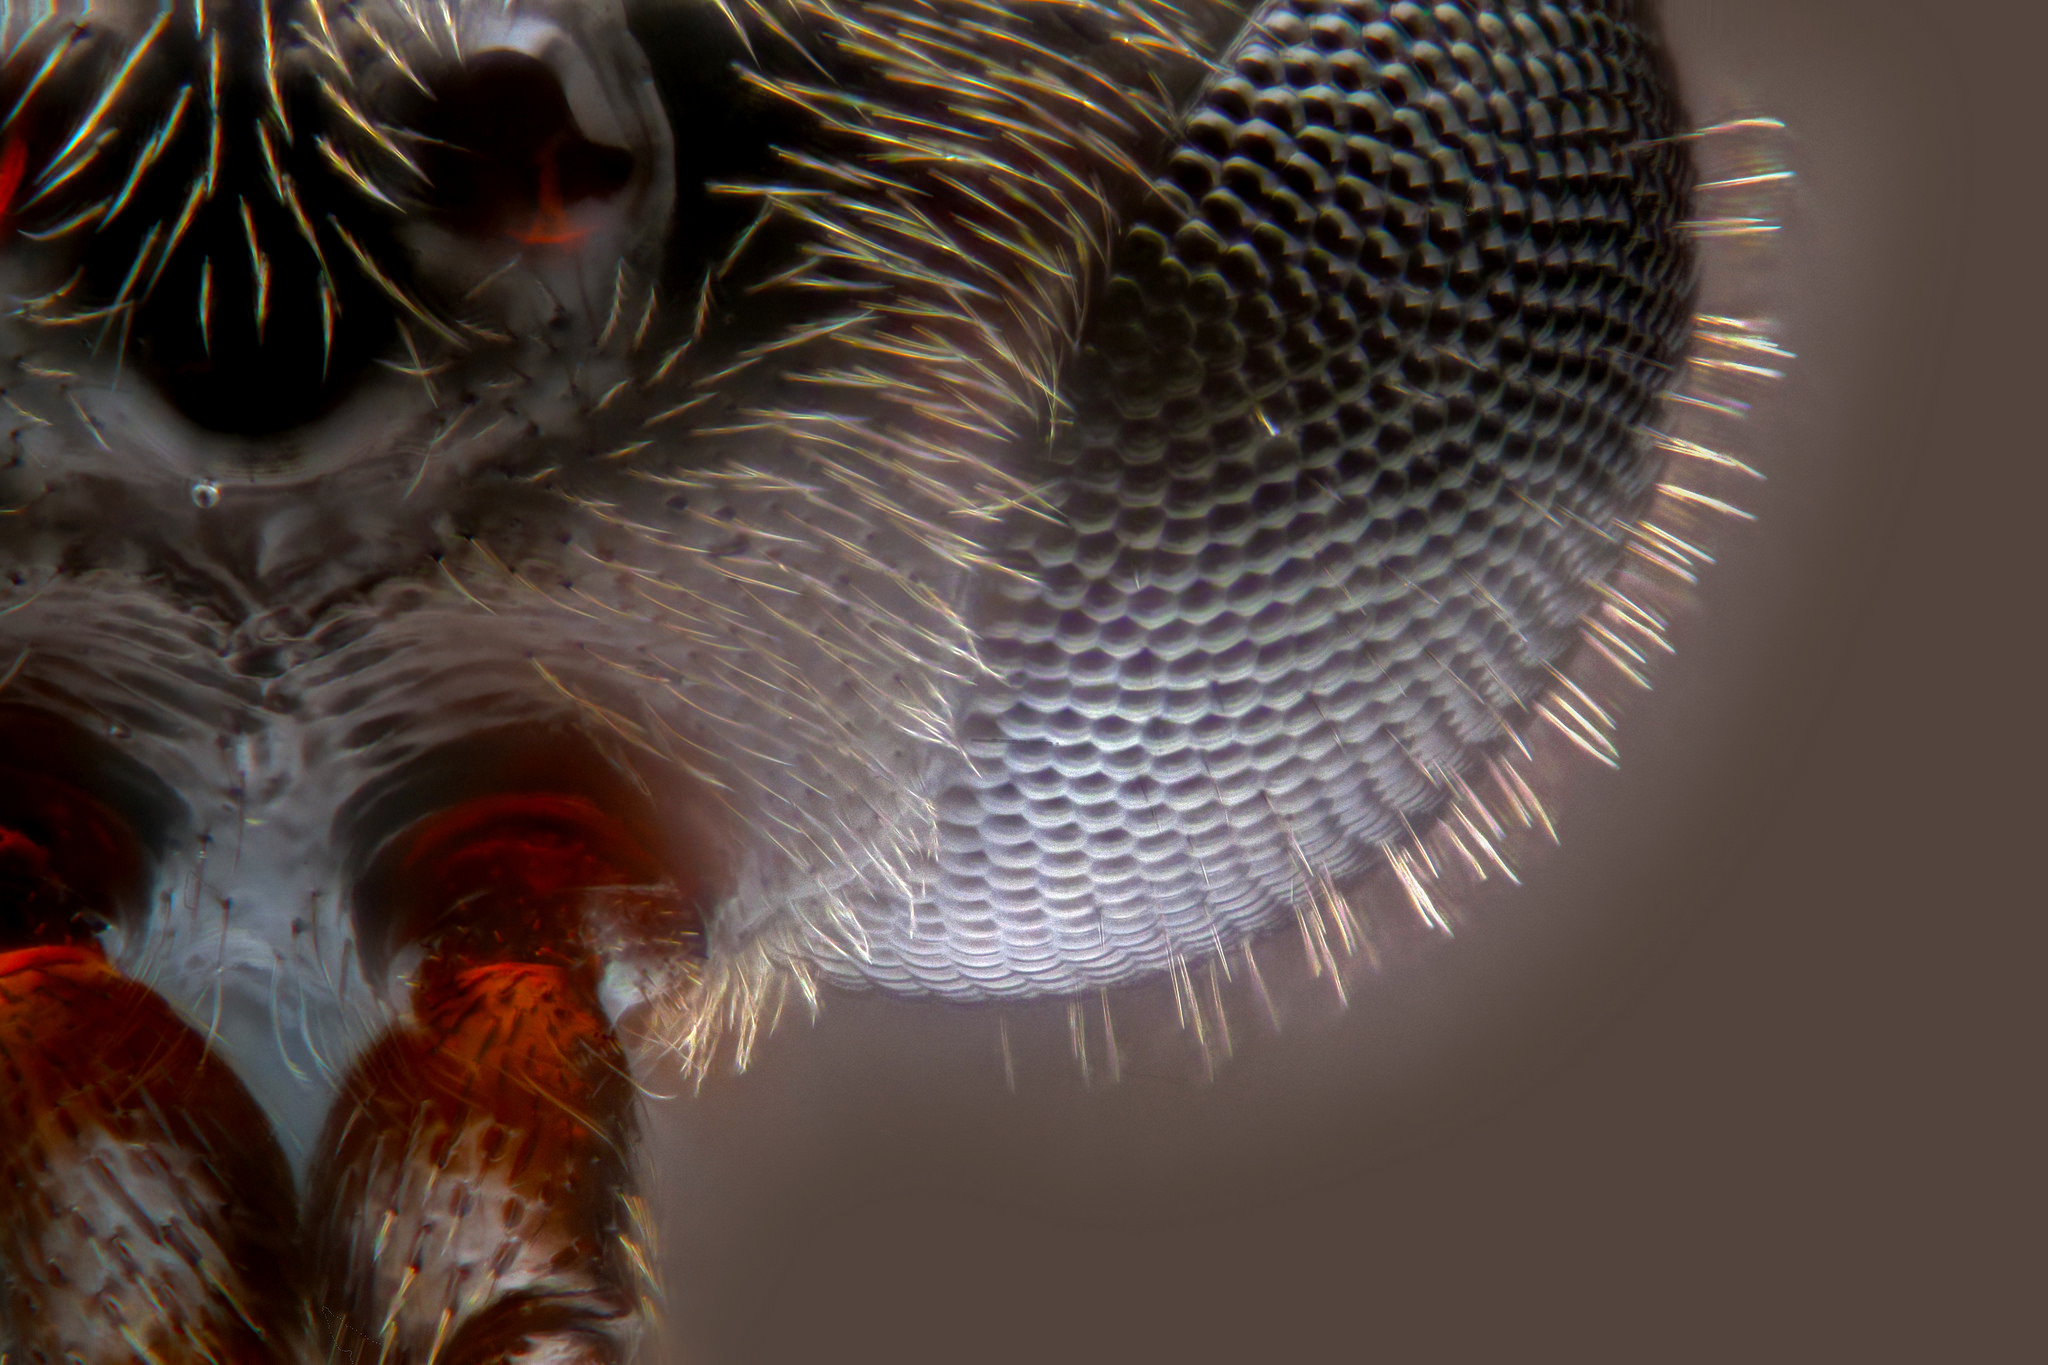 I’ve Never Seen Macroscopic Images As Incredibly Sharp As These Ones